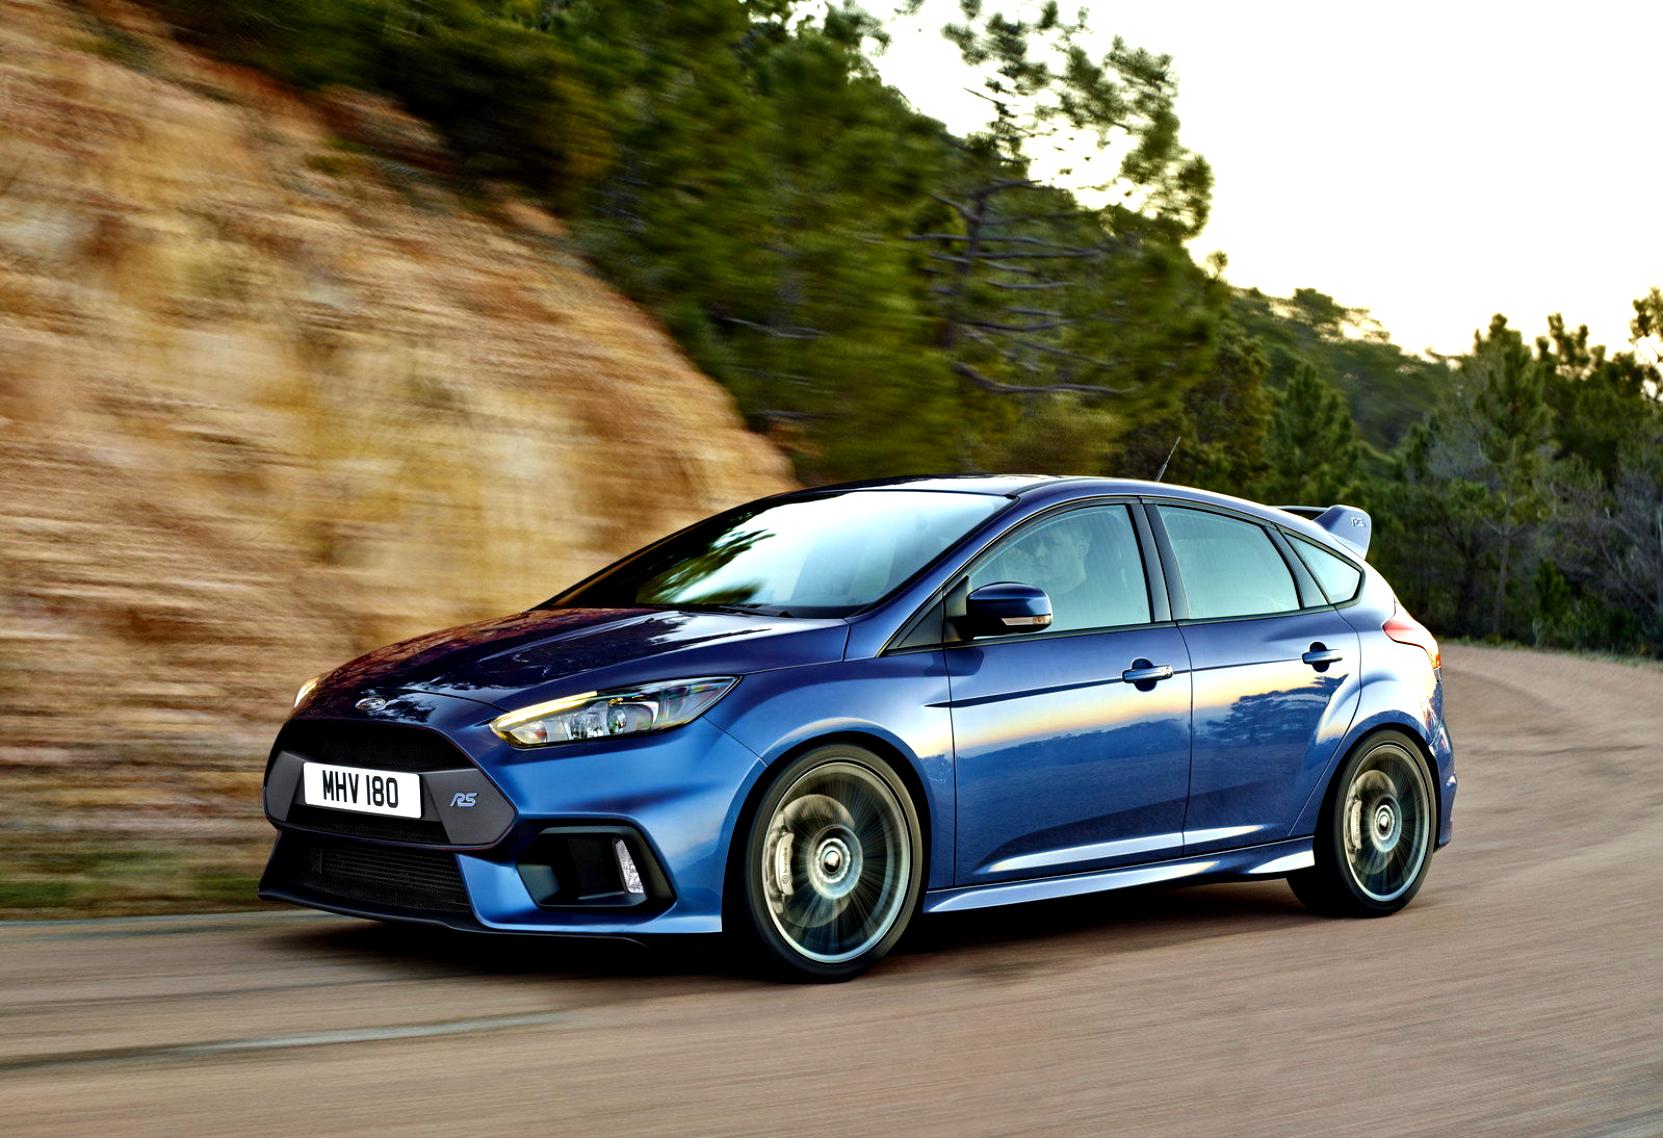 Ford Focus RS 2016 #29